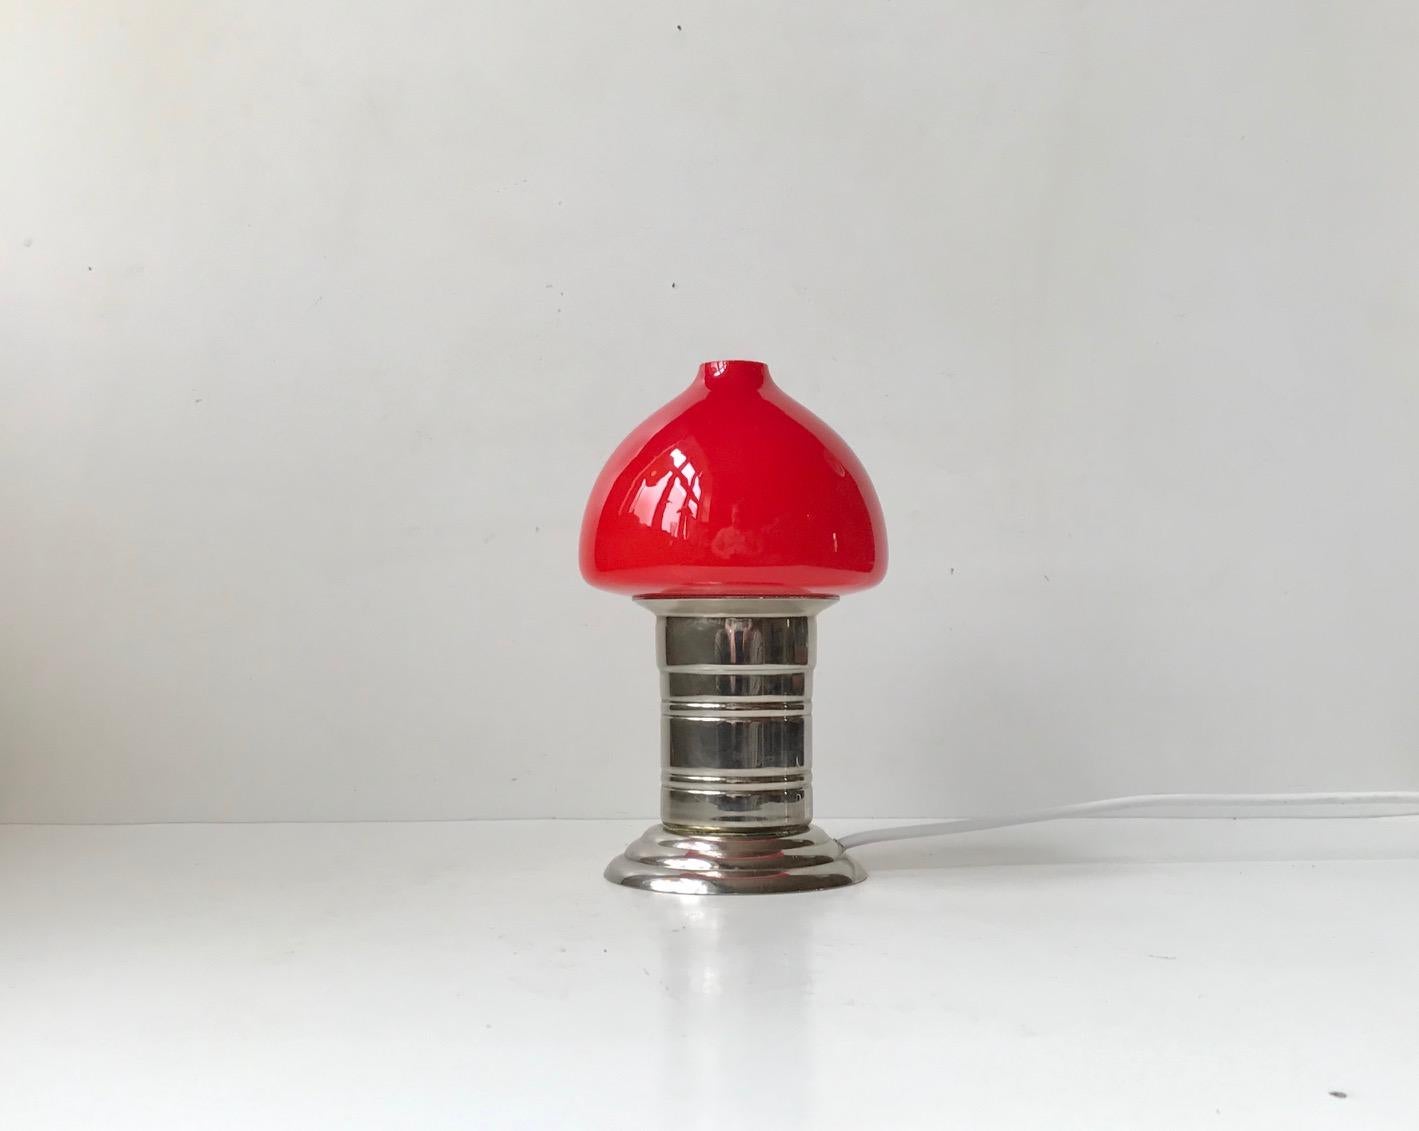 Unusual and petite table light executed in nickel plated steel and featuring a mushroom shade in cased red glass that turn orange when lid. Unknown Scandinavian maker/design, circa 1960-70. Measurements: H: 20 cm, D: 12 cm.